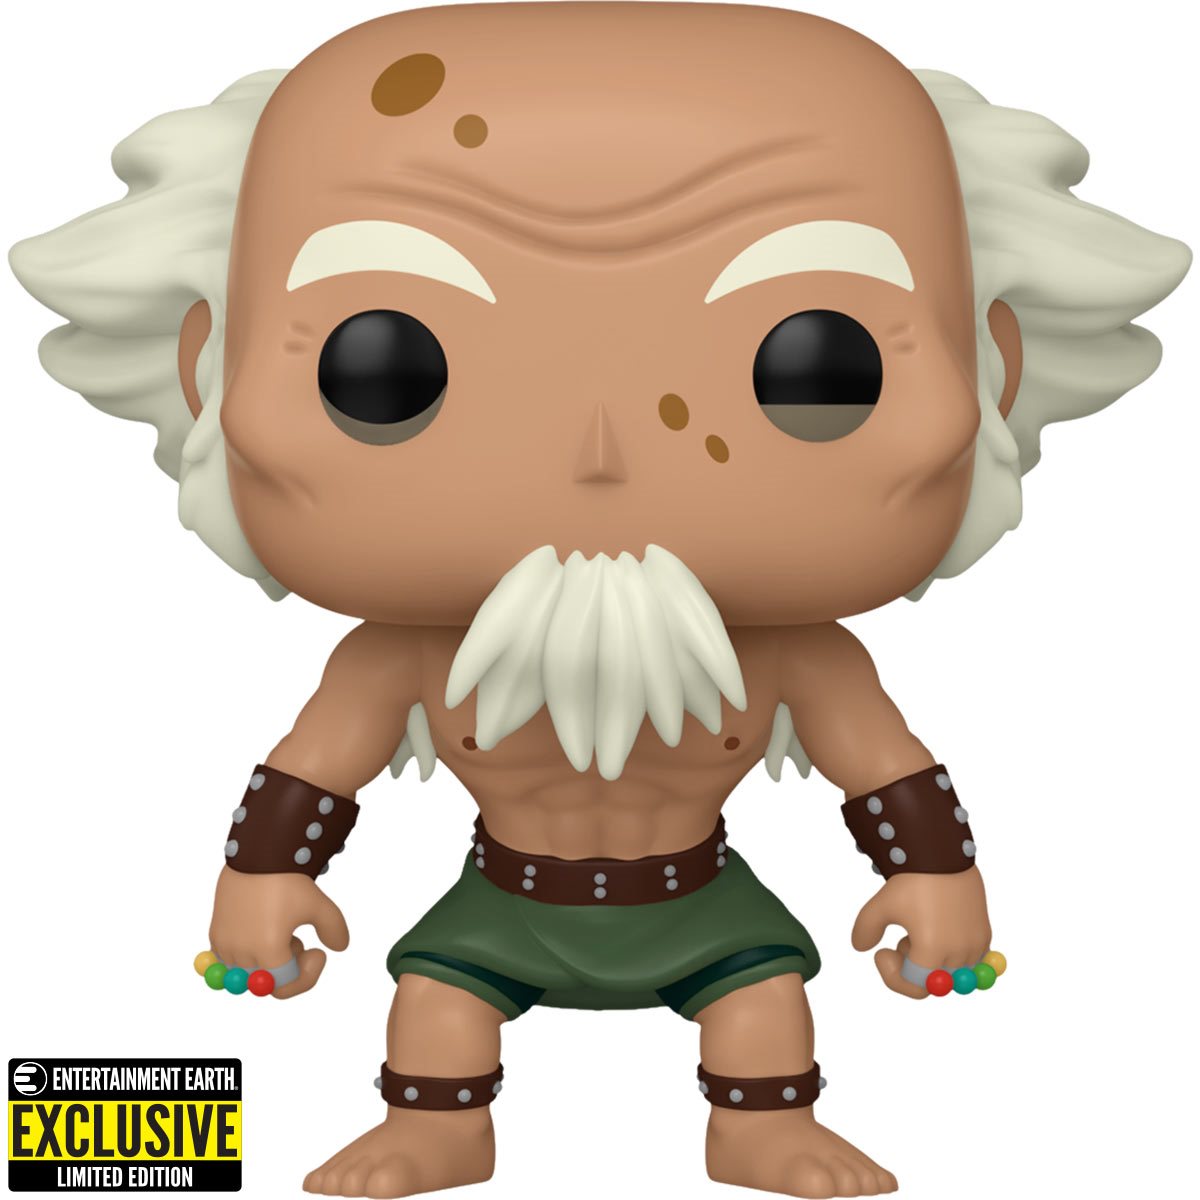 All the Funko POP Avatar The Last Airbender figures